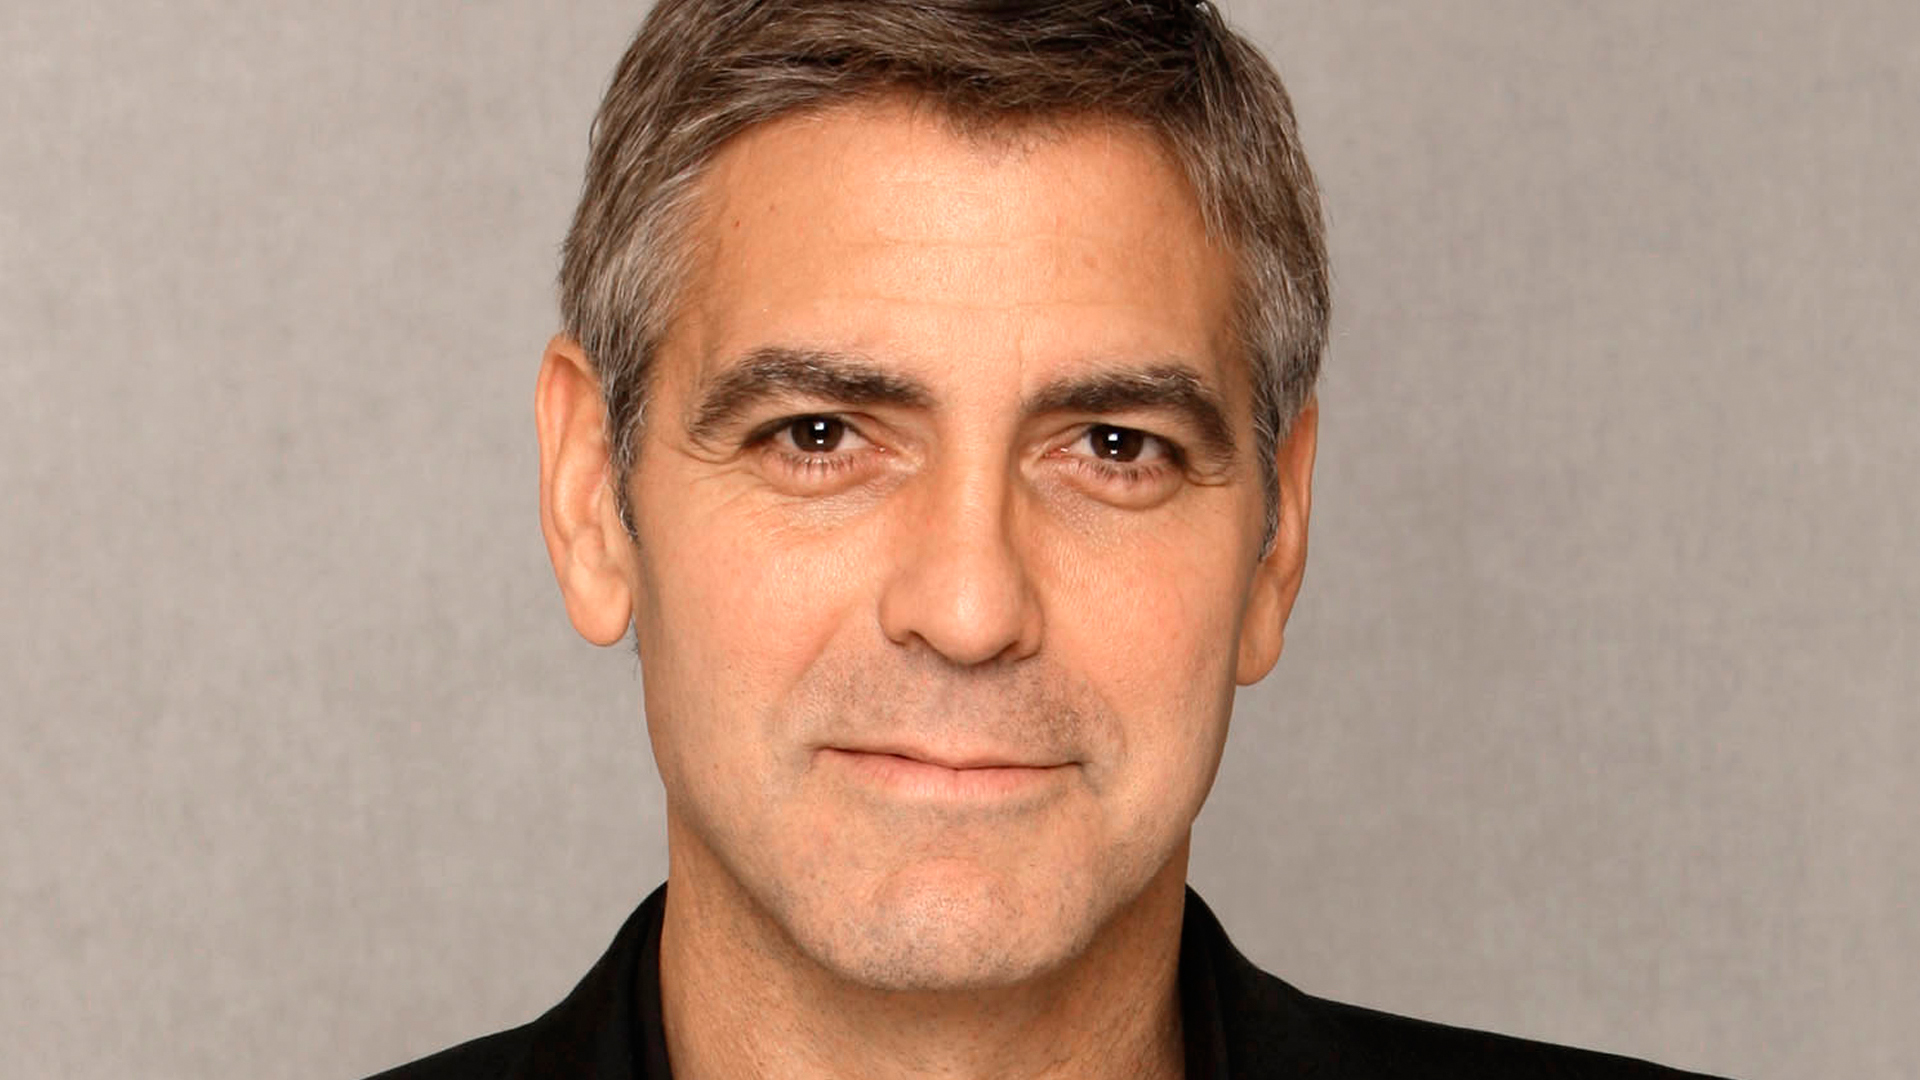 High Resolution Wallpaper | George Clooney 1920x1080 px